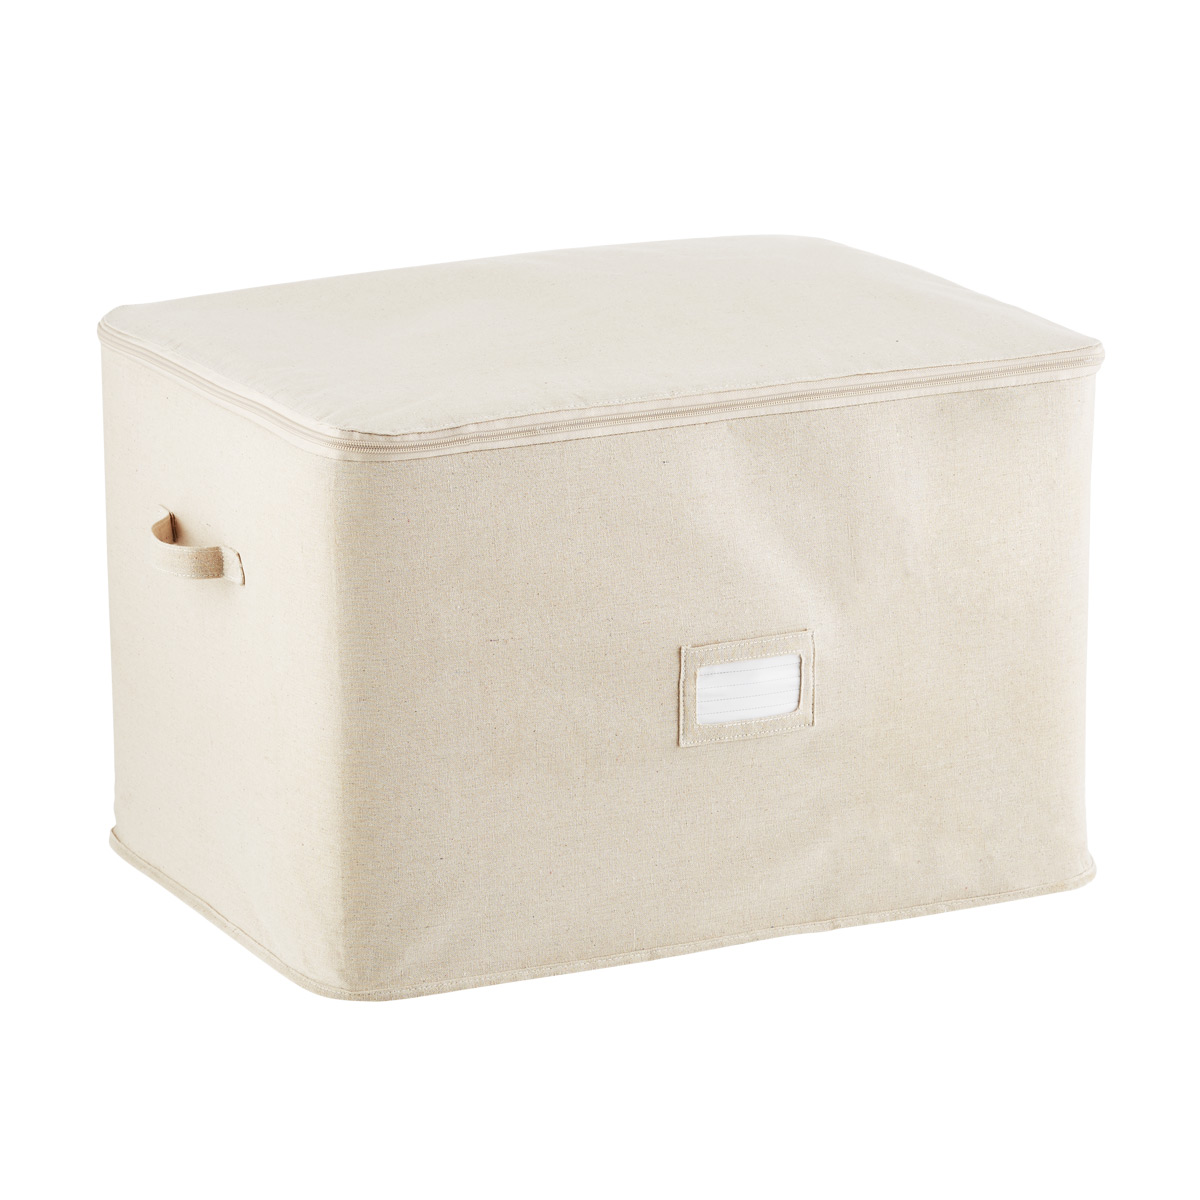 https://www.containerstore.com/catalogimages/471330/10079381-storage-bag-large-natural.jpg